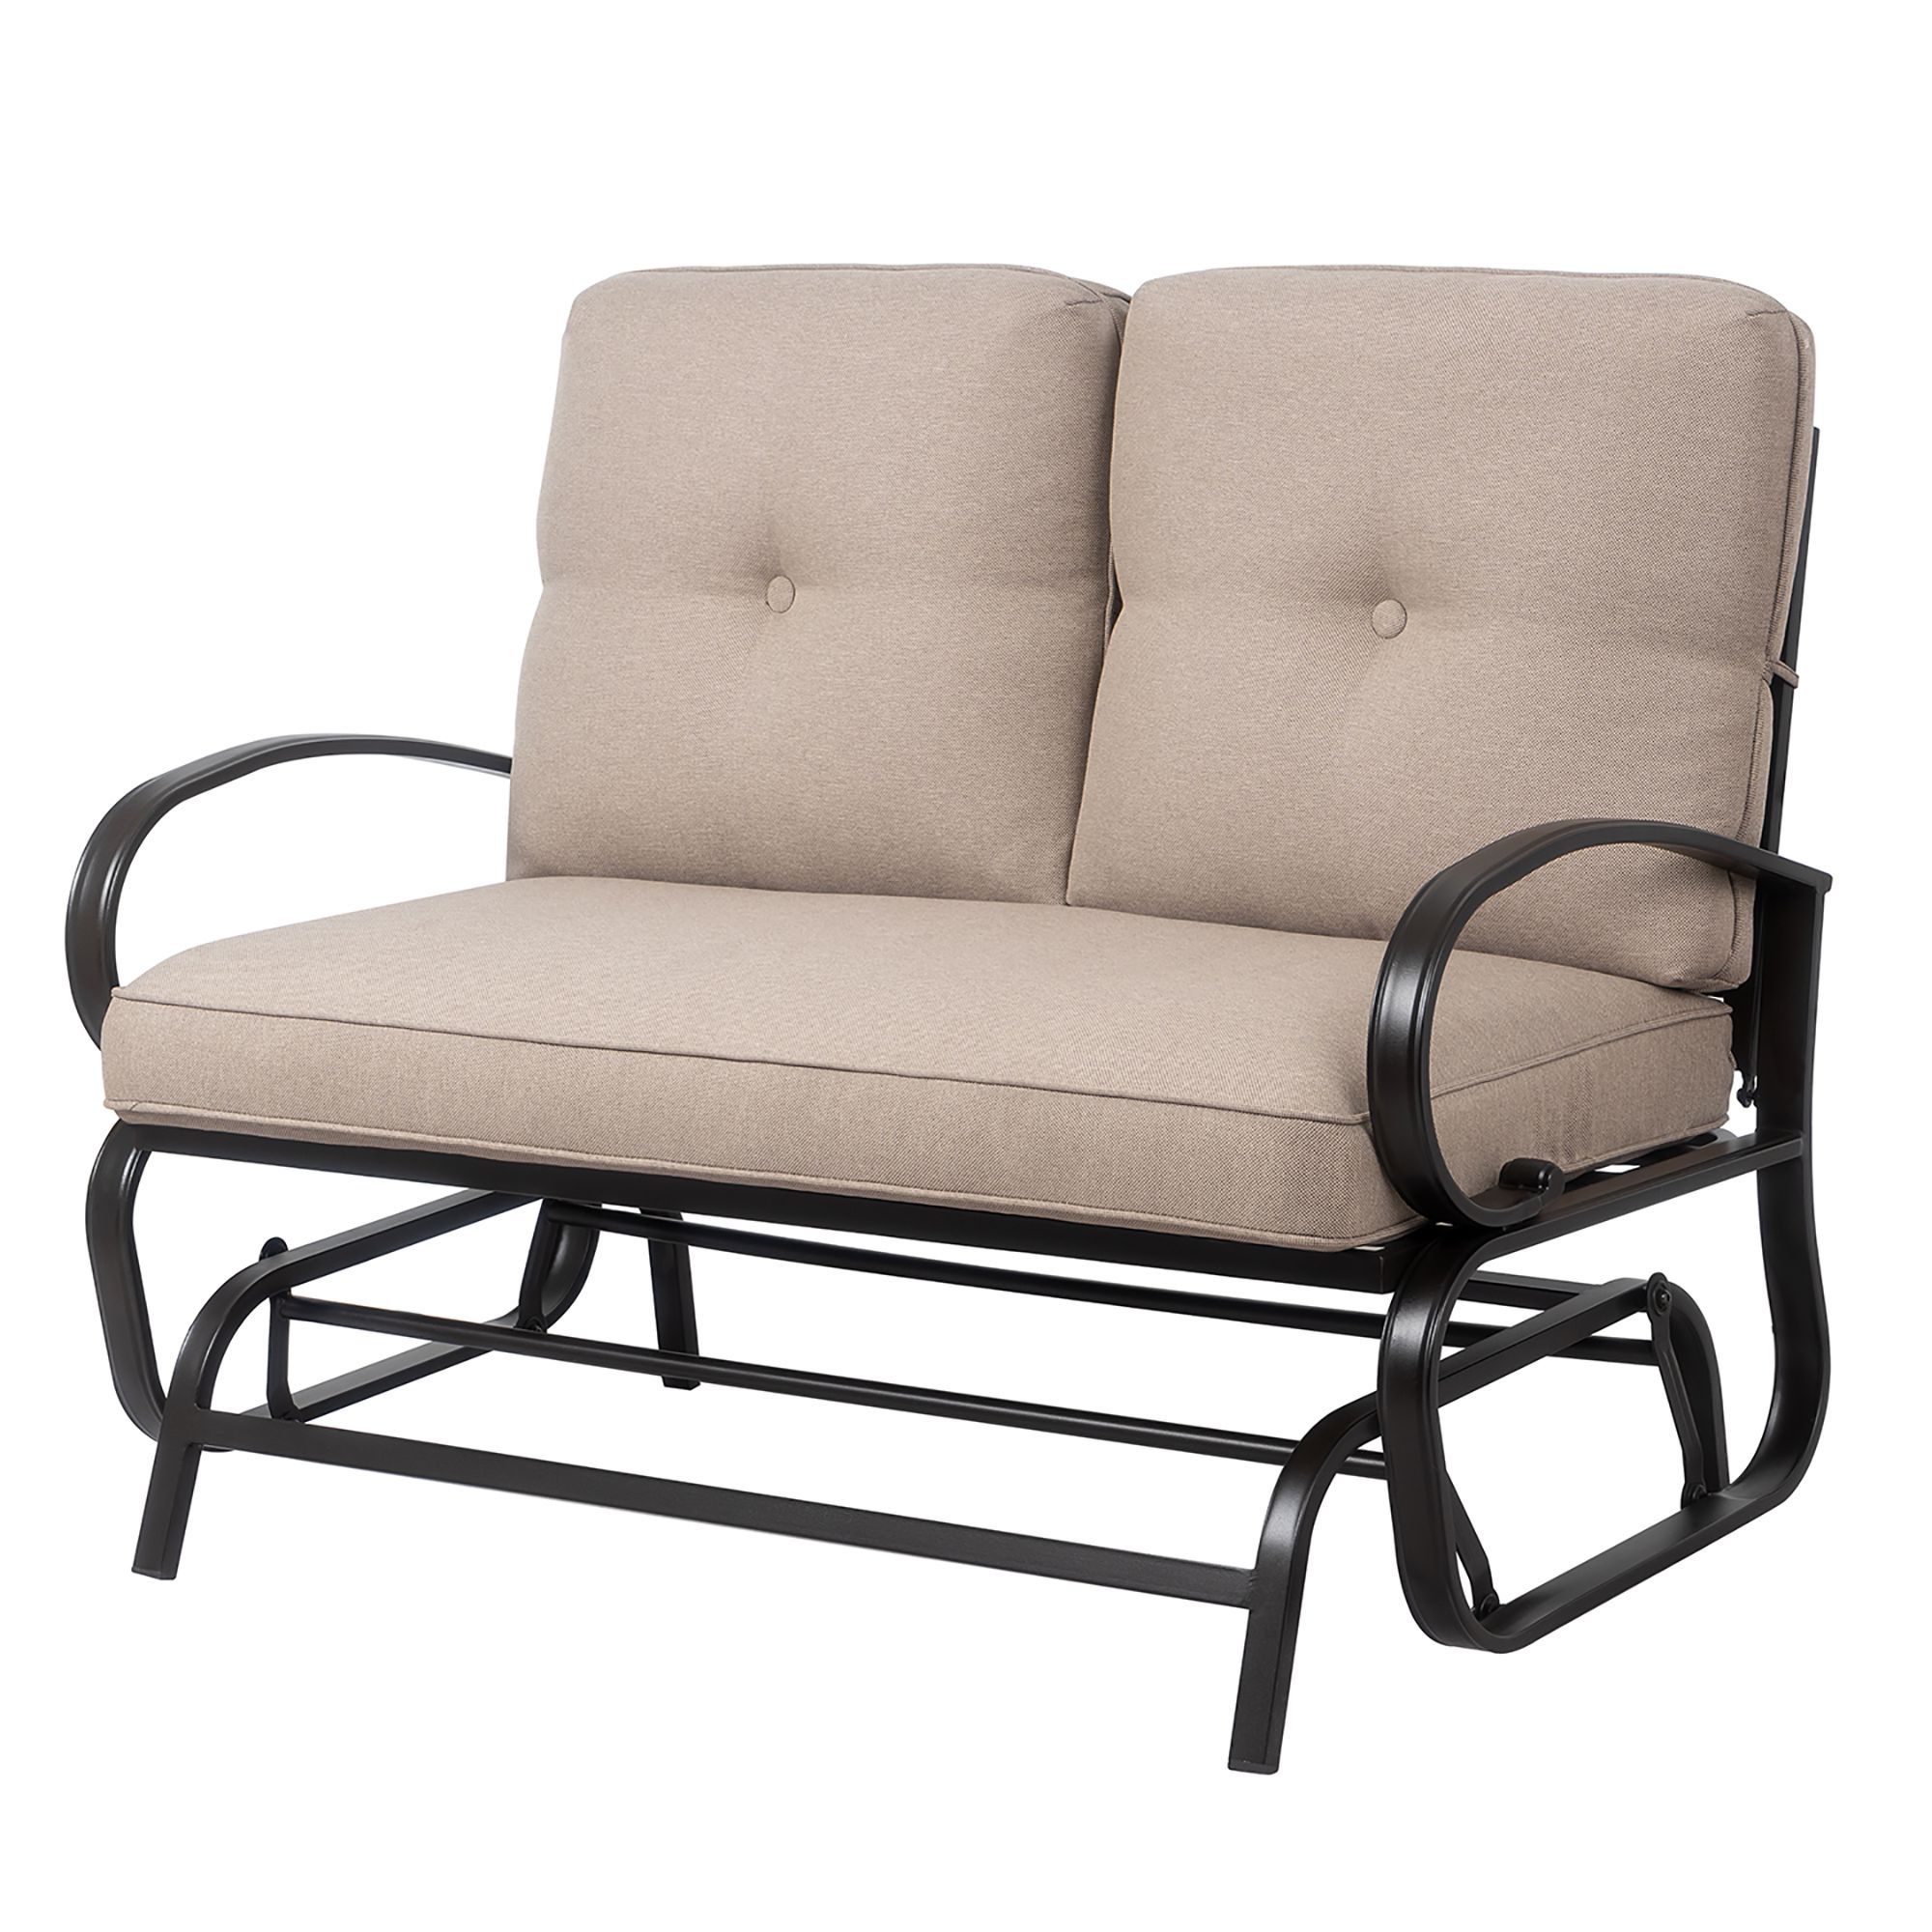 Latest Iron Grove Slatted Glider Benches Regarding Loveseat Outdoor Patio Glider Rocking Bench,porch Furniture (View 26 of 30)